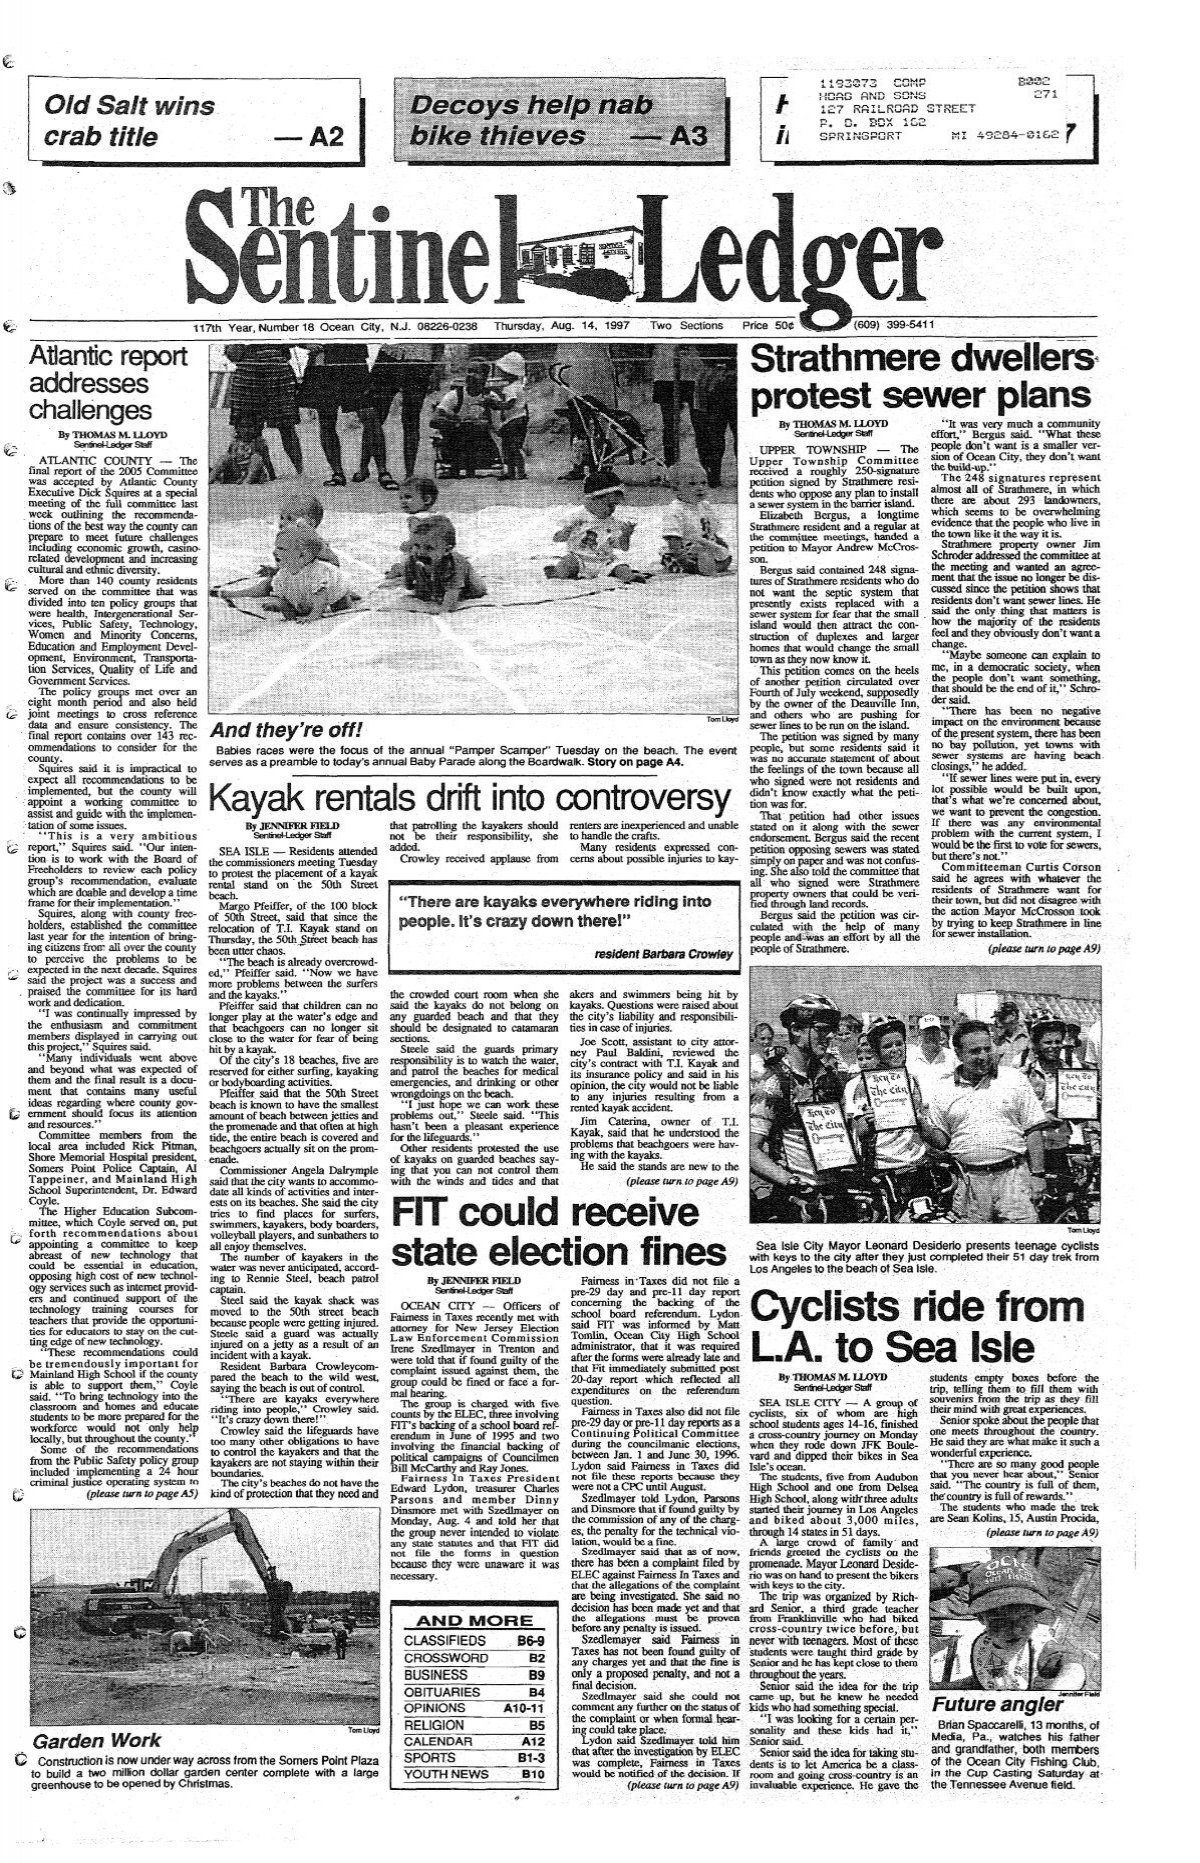 Cyclists ride from L.A. to Sea Isle - On-Line Newspaper Archives of